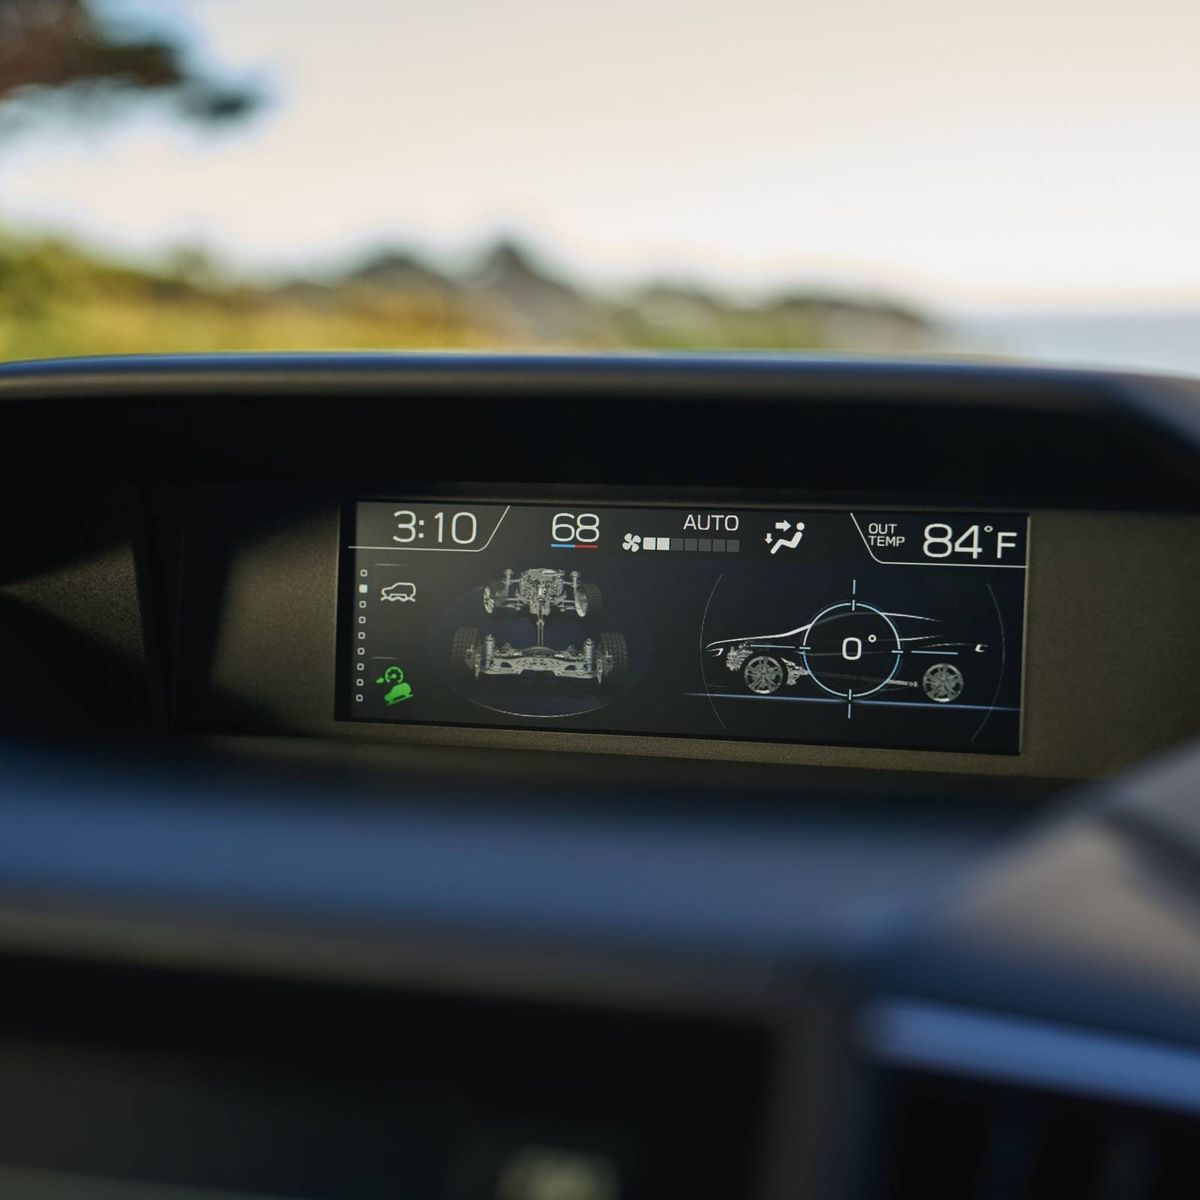 This is why your car thermometer is almost always wrong - The